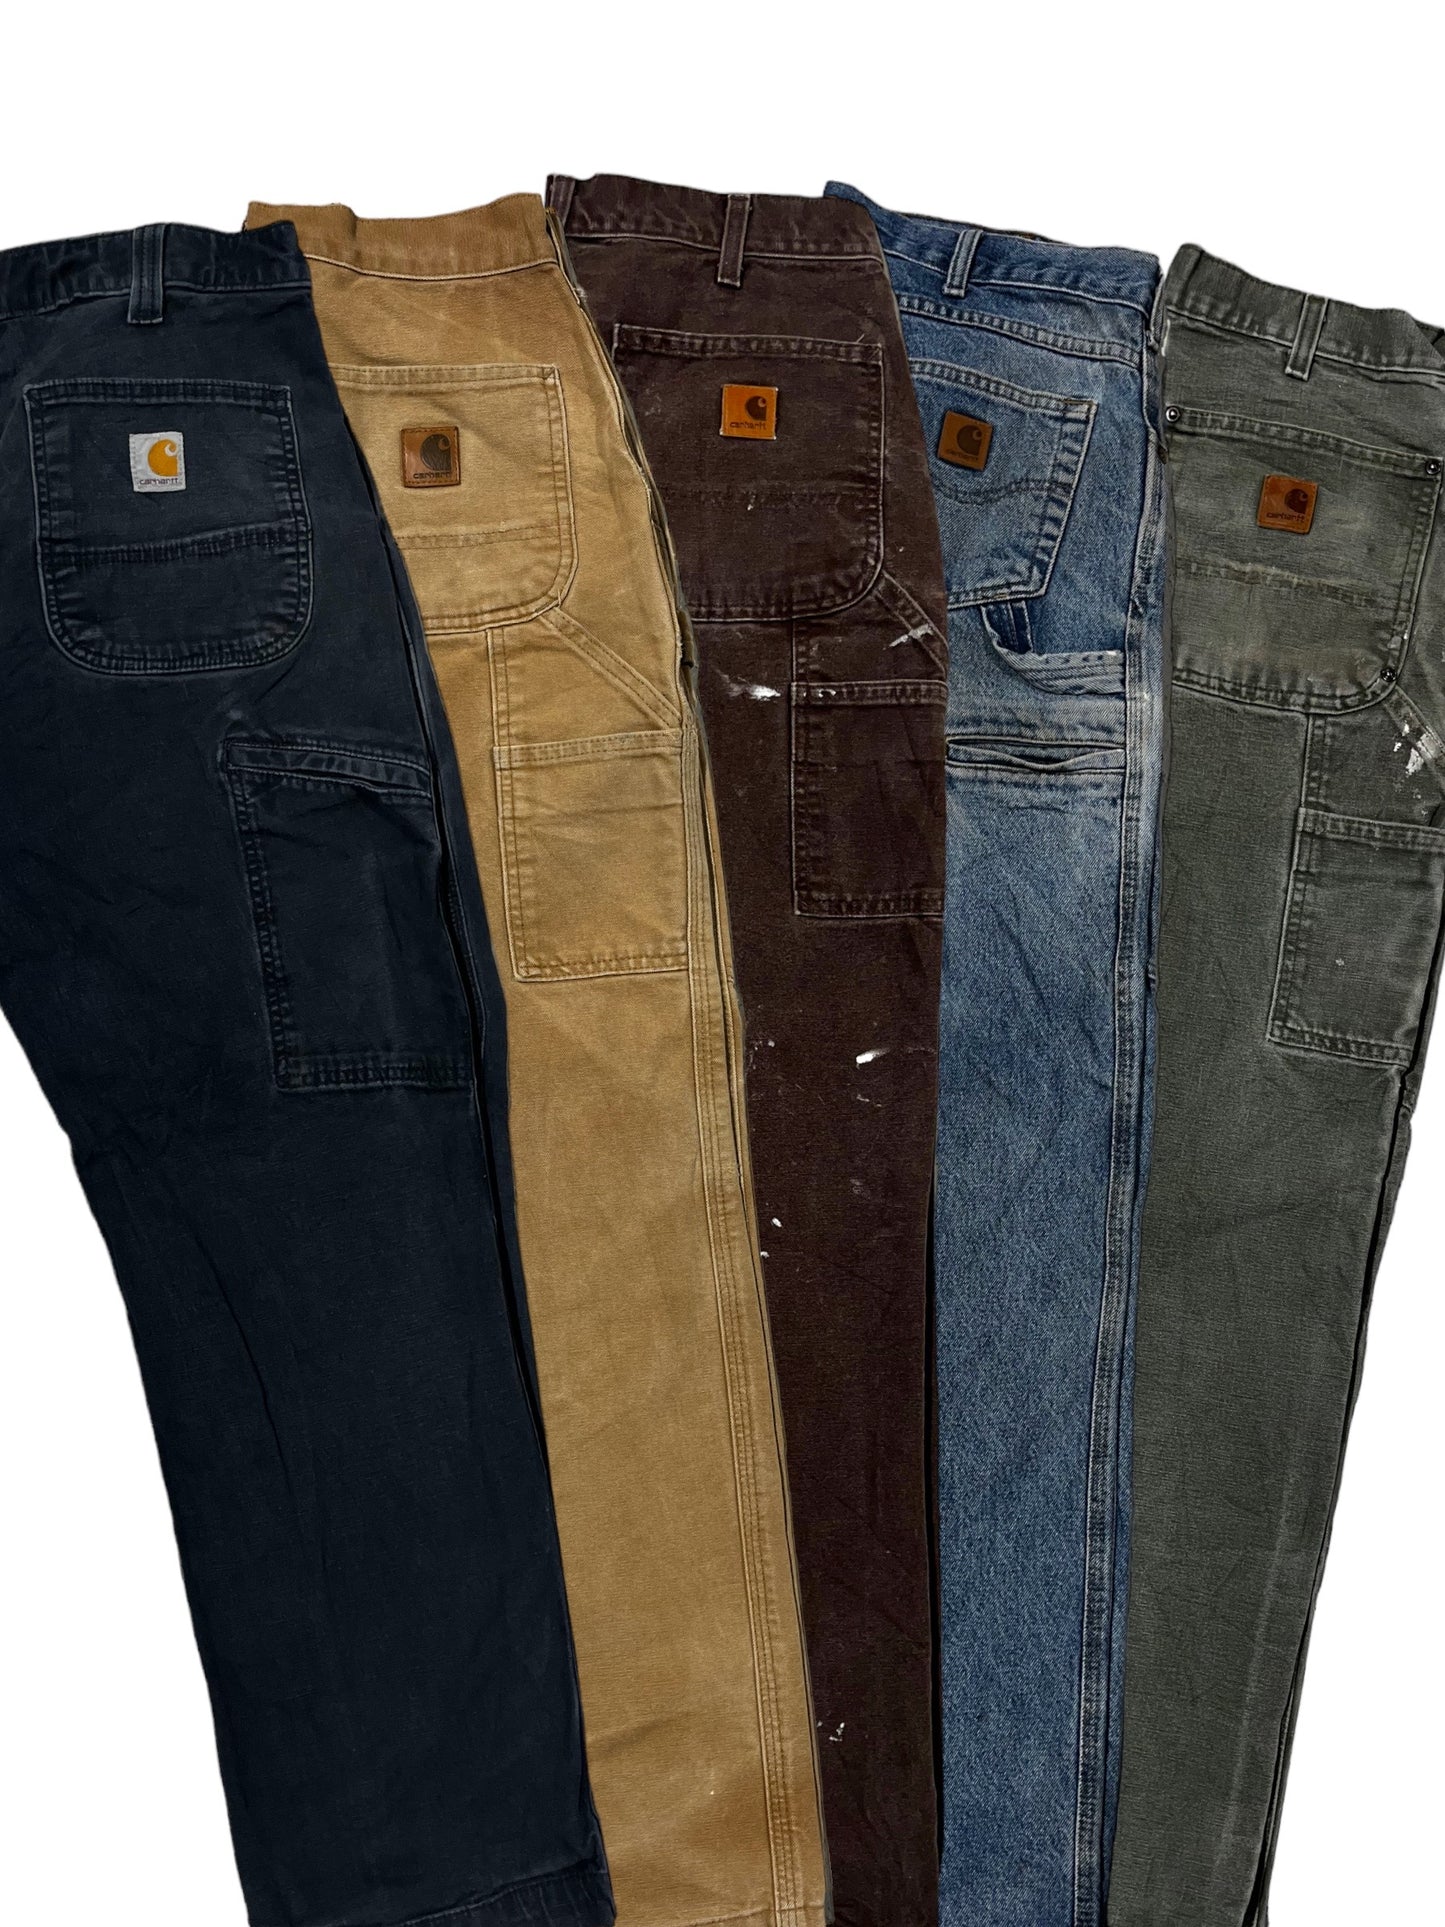 CARHARTT & DICKIES TROUSERS BIG SIZES - 30 PIECES - SUPER SACK